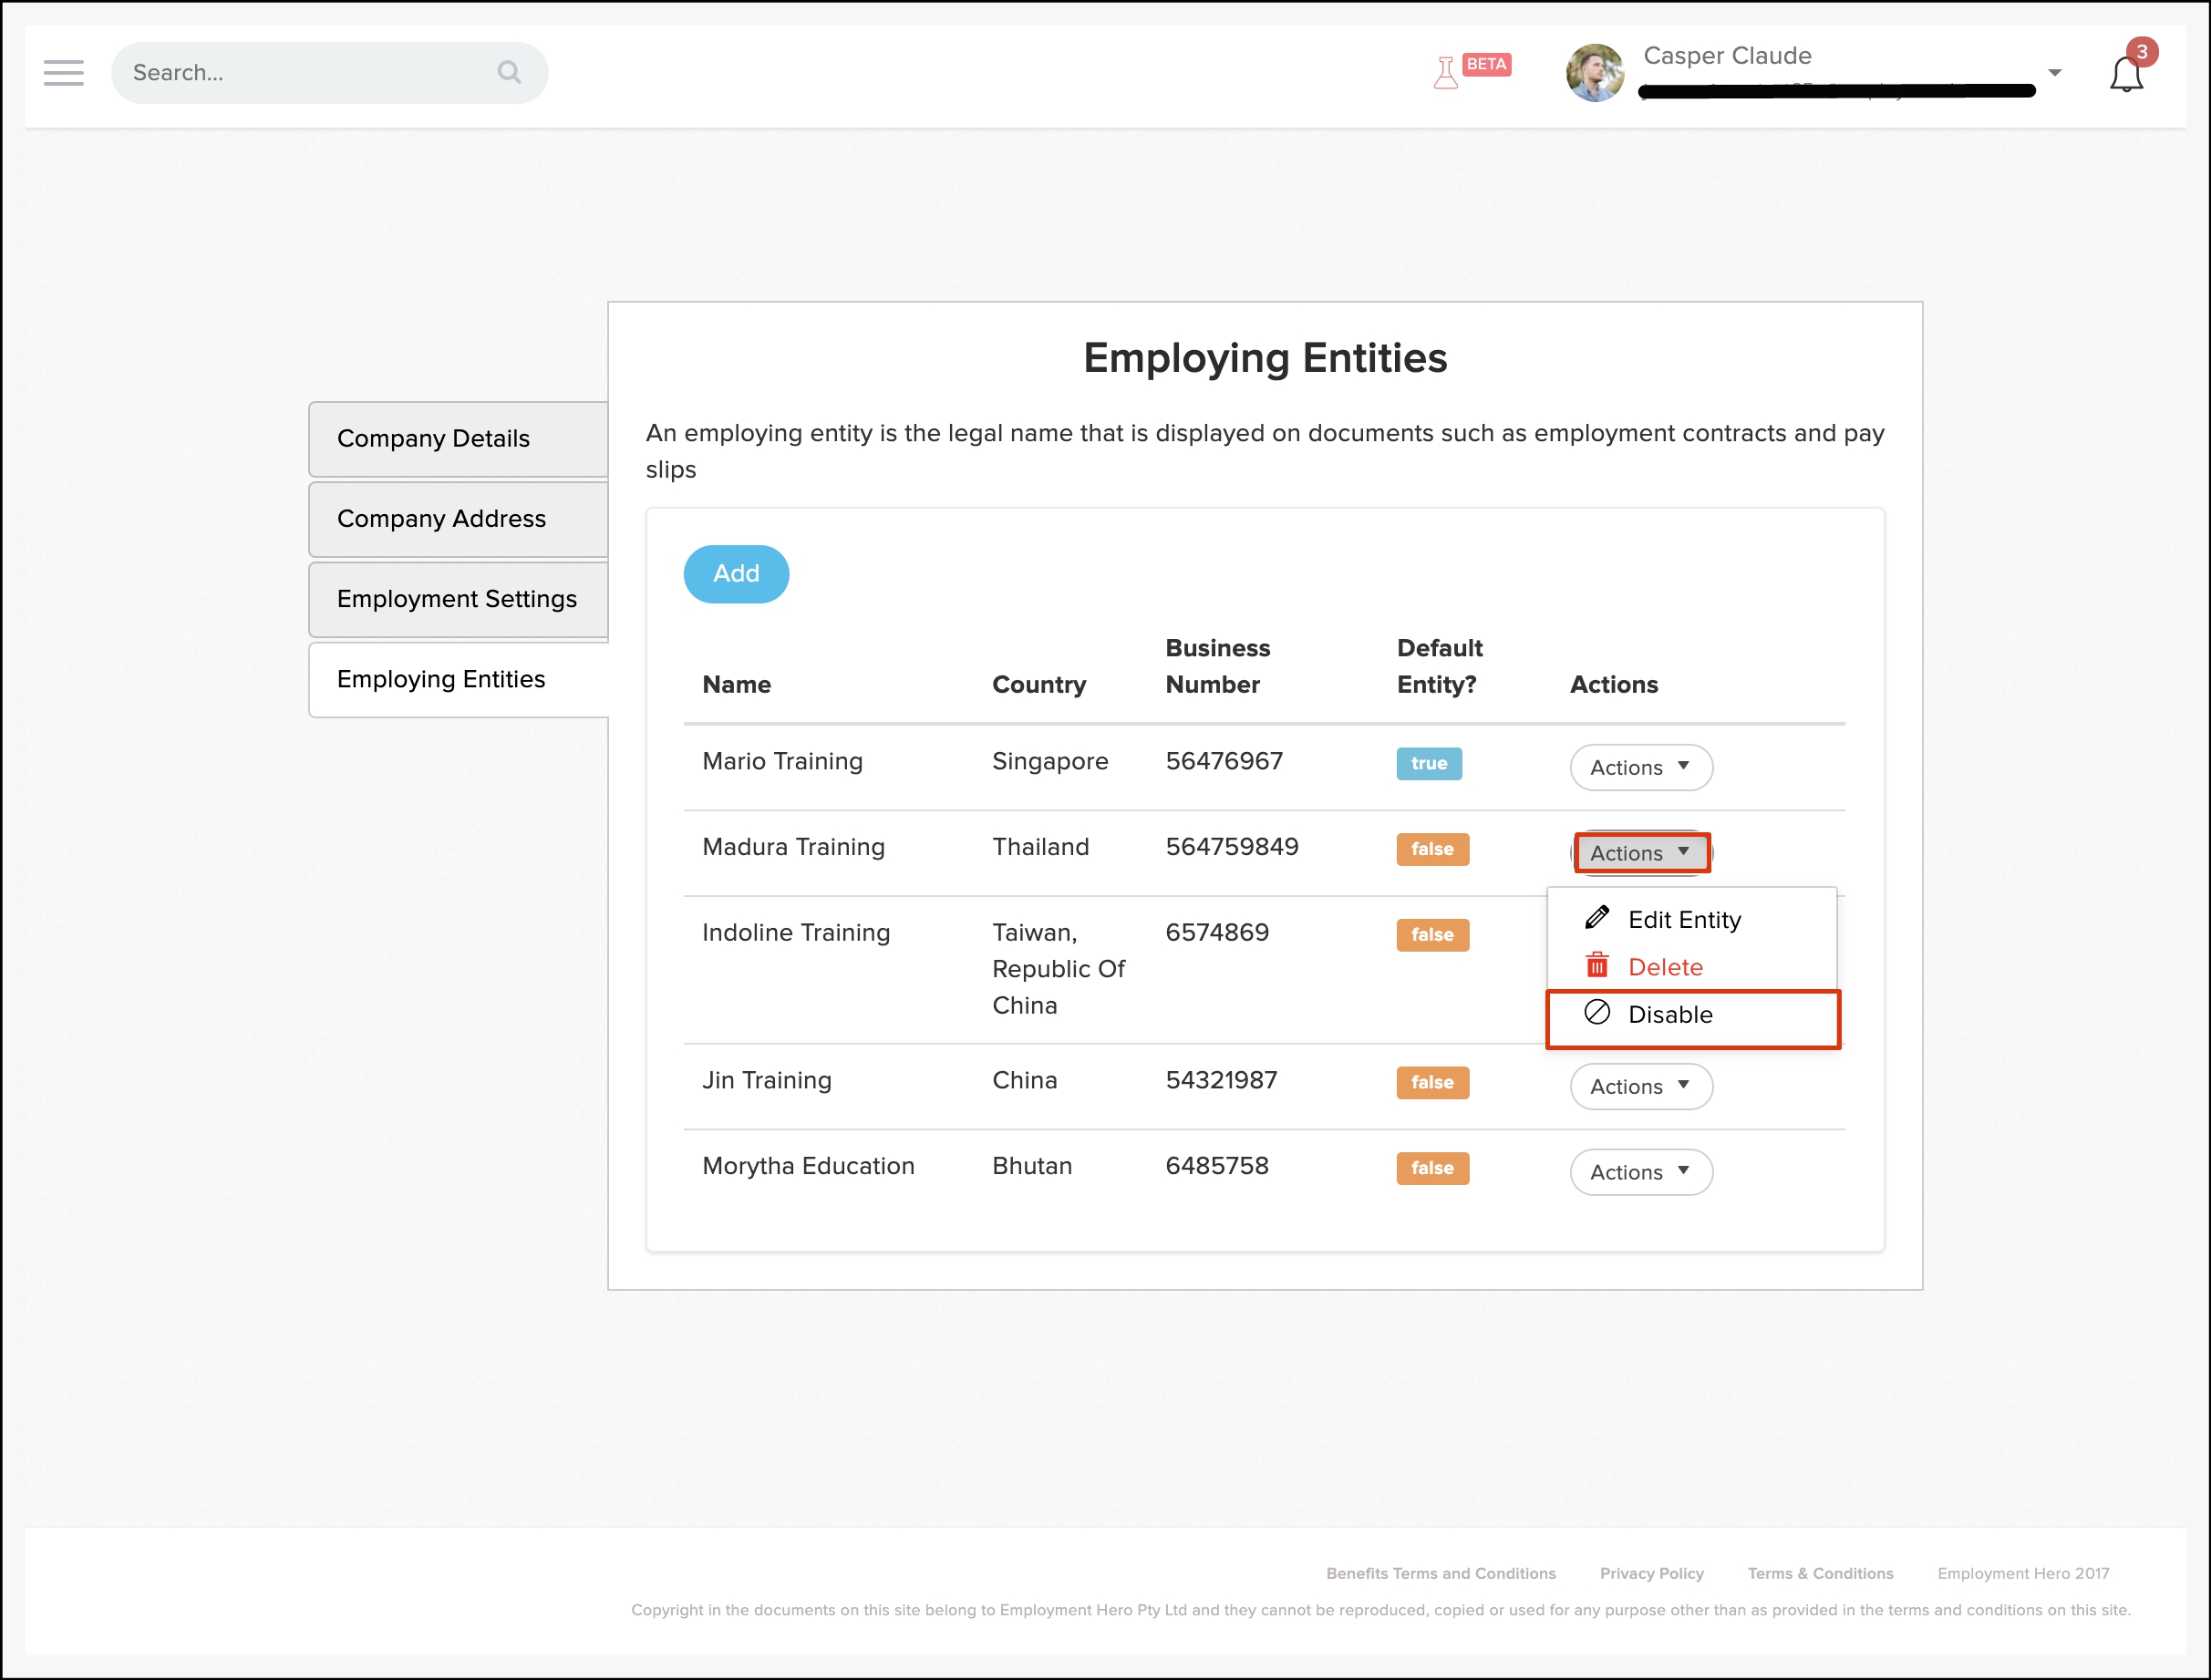 screenshot of the employing entities page. to the left of the screen you have the options company details, company address, employment settings, employing entities. employing entities is selected. on the screen reads employing entities. an employing entity is the legal name that is displayed on documents such as employment contracts and pay slips. below is an add button. below that is a table of company names vertically. horizontally they are sorted by name, country, business number, default entry status and action option. the action button for the first company entry is highlighted in red giving the option to disable the entry